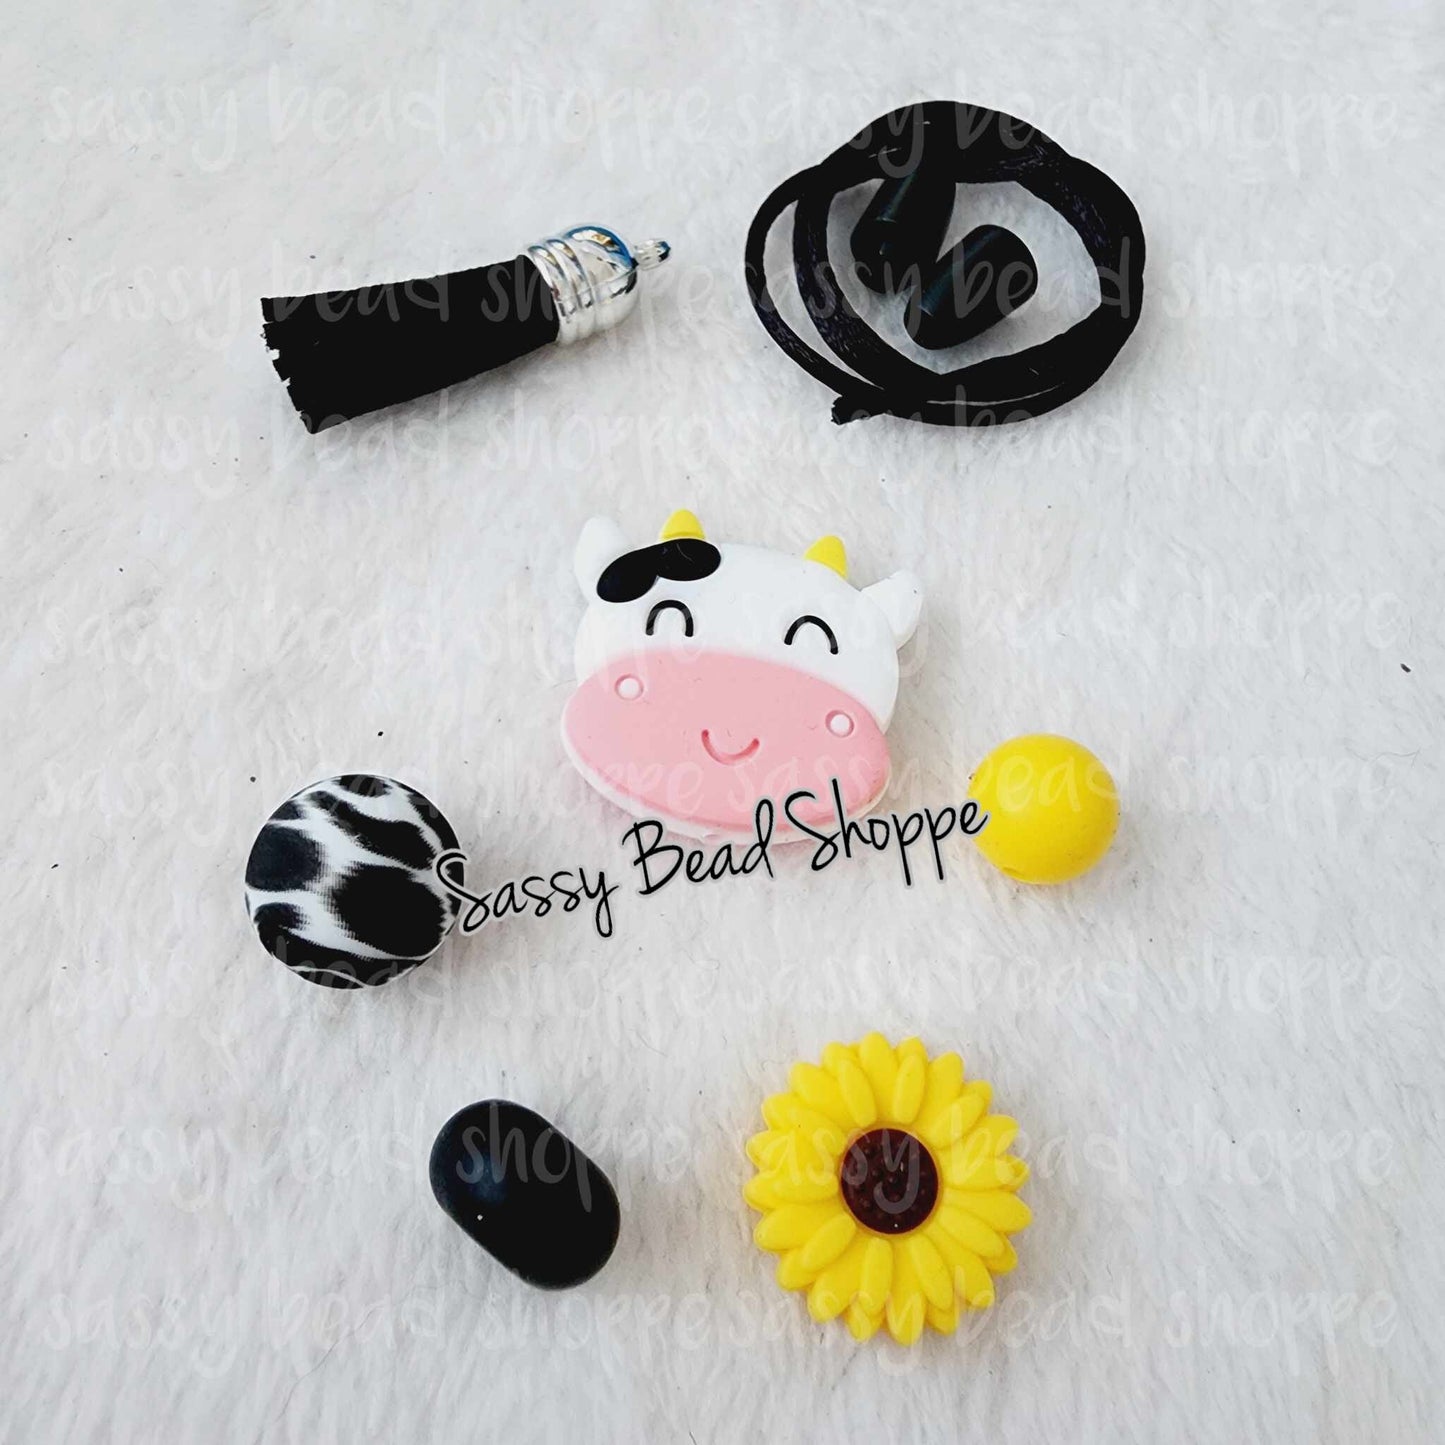 Sassy Bead Shoppe Cutie Cow Car Charm What you will receive in your kit